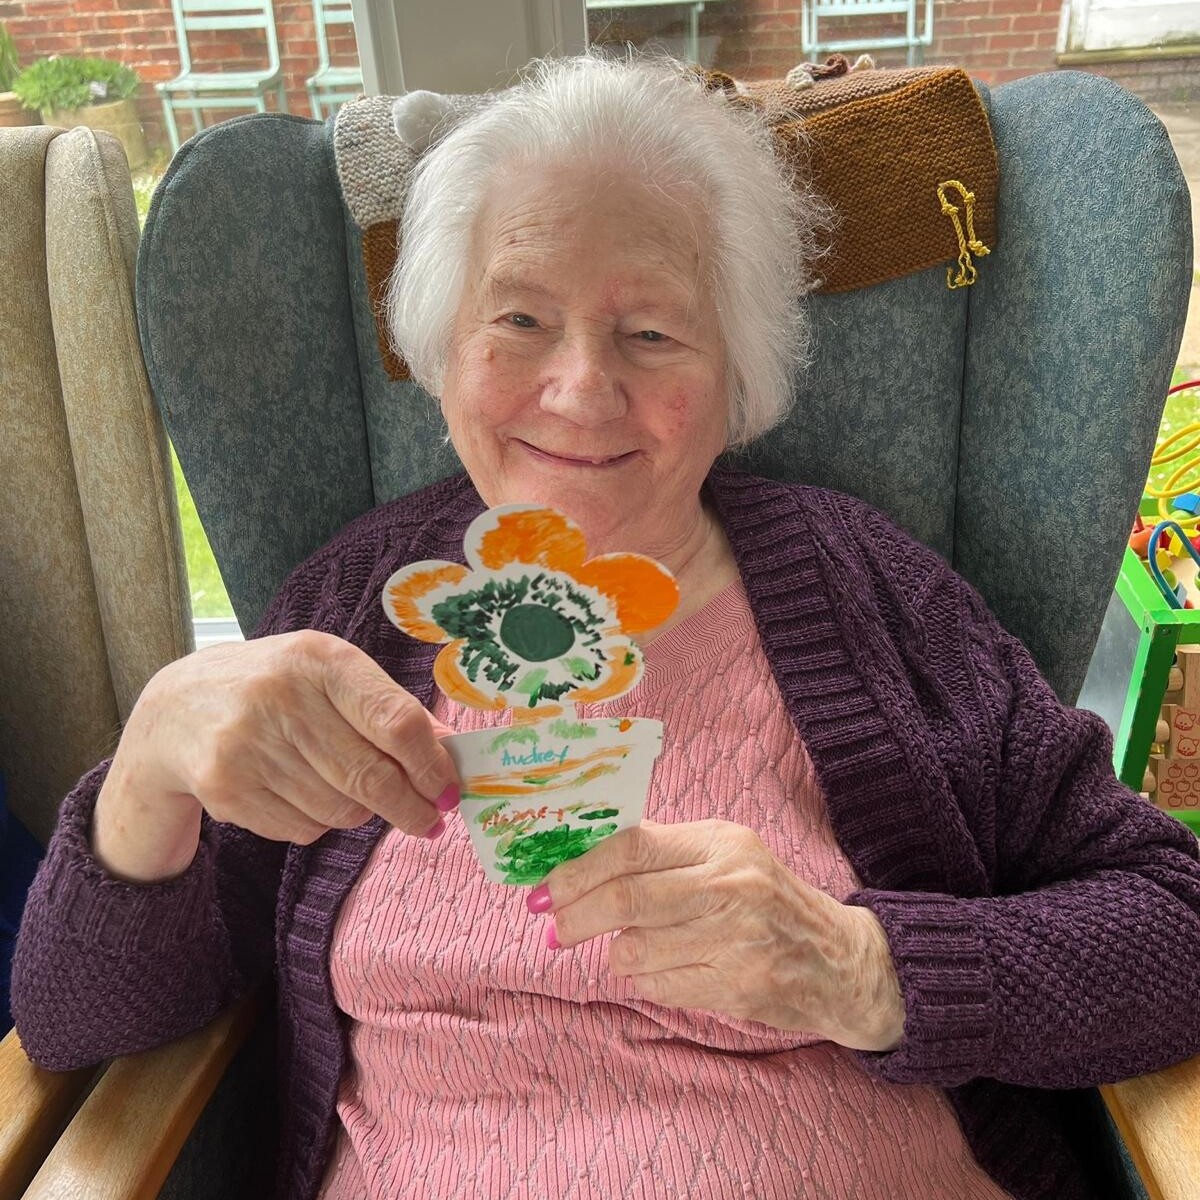 Fairways Care Home Hosts Creative Day to Celebrate Chelsea Flower Show Triumph